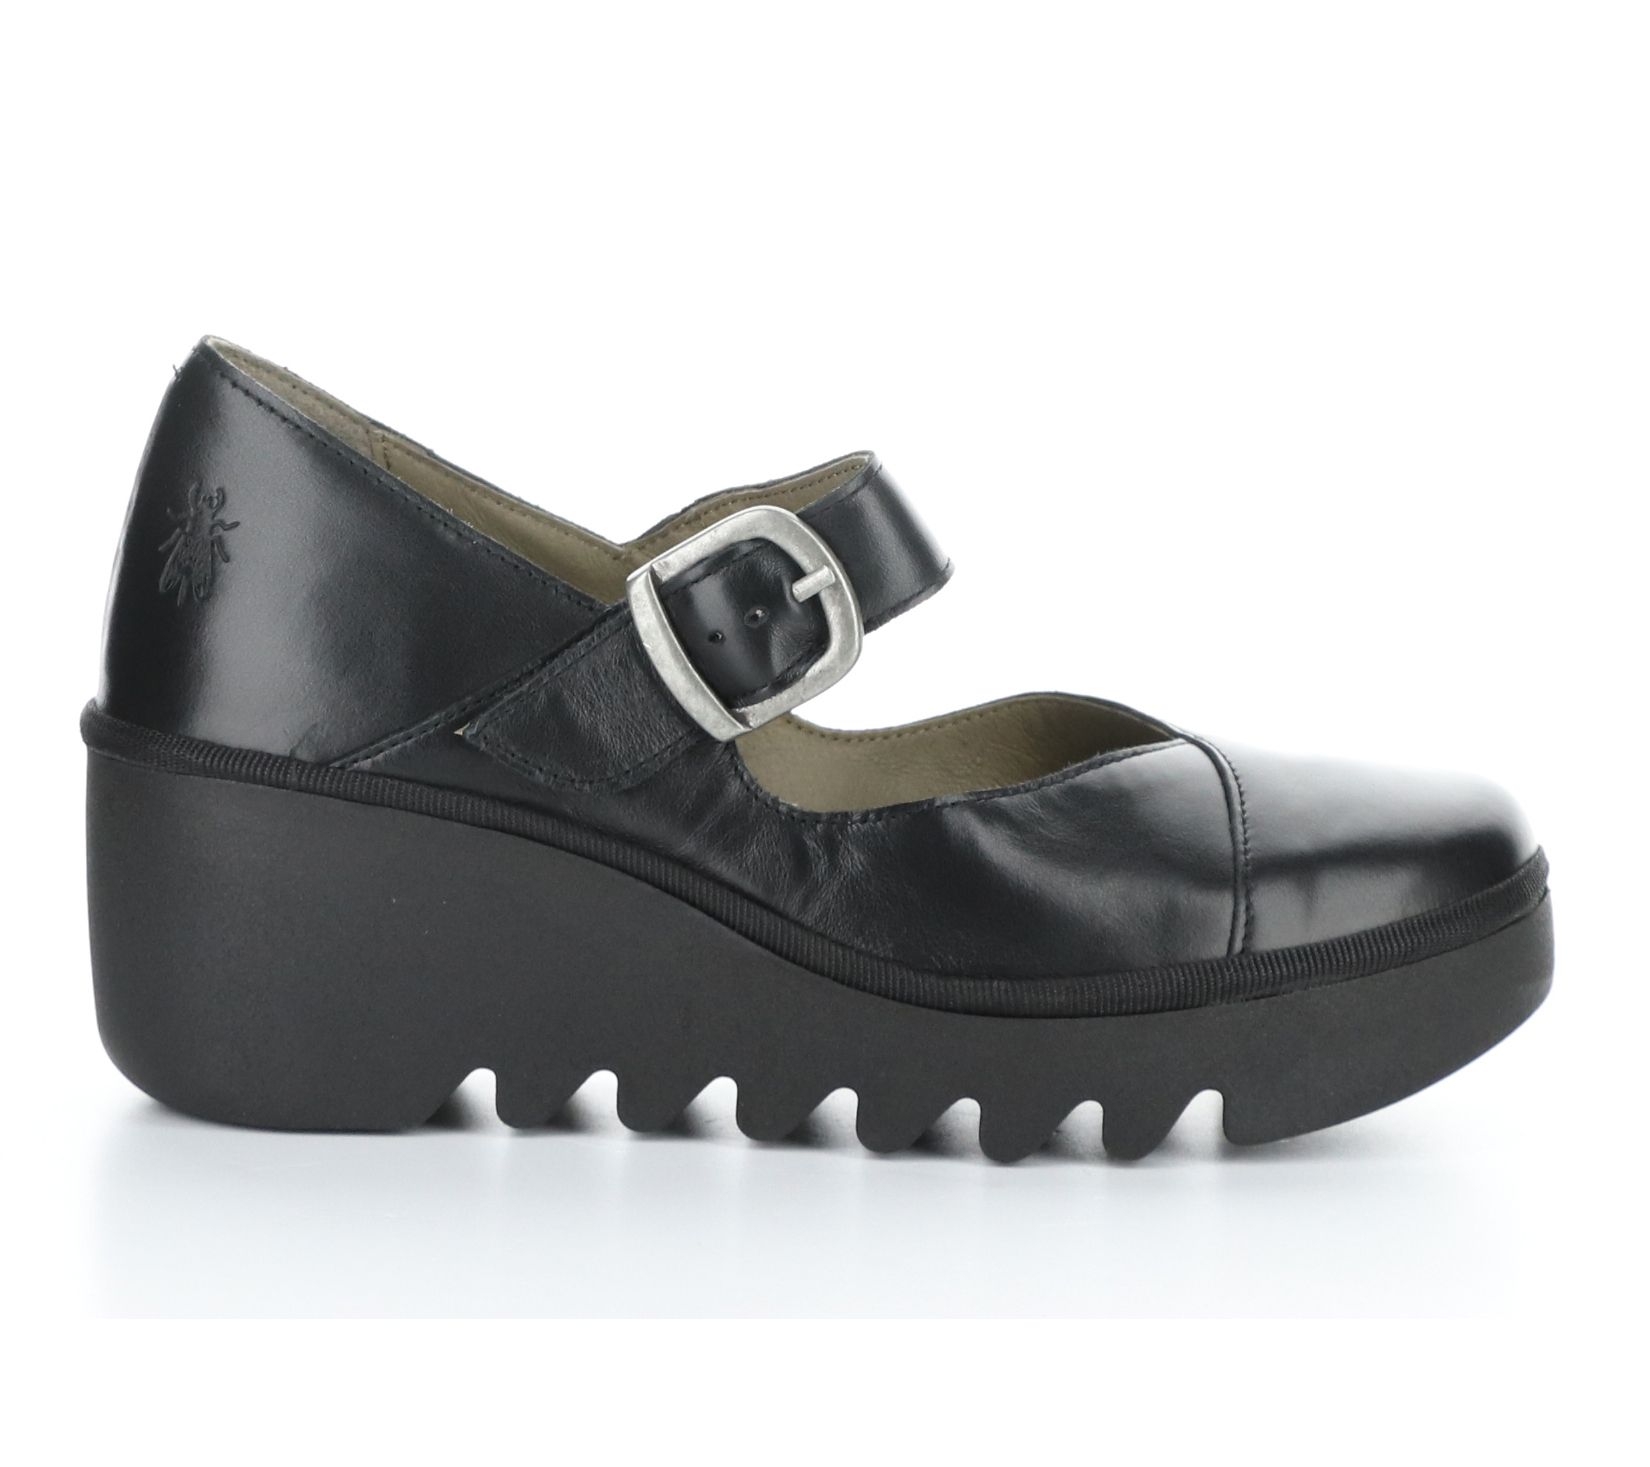 Fly London Leather Mary Janes Wedge - Baxe - QVC.com